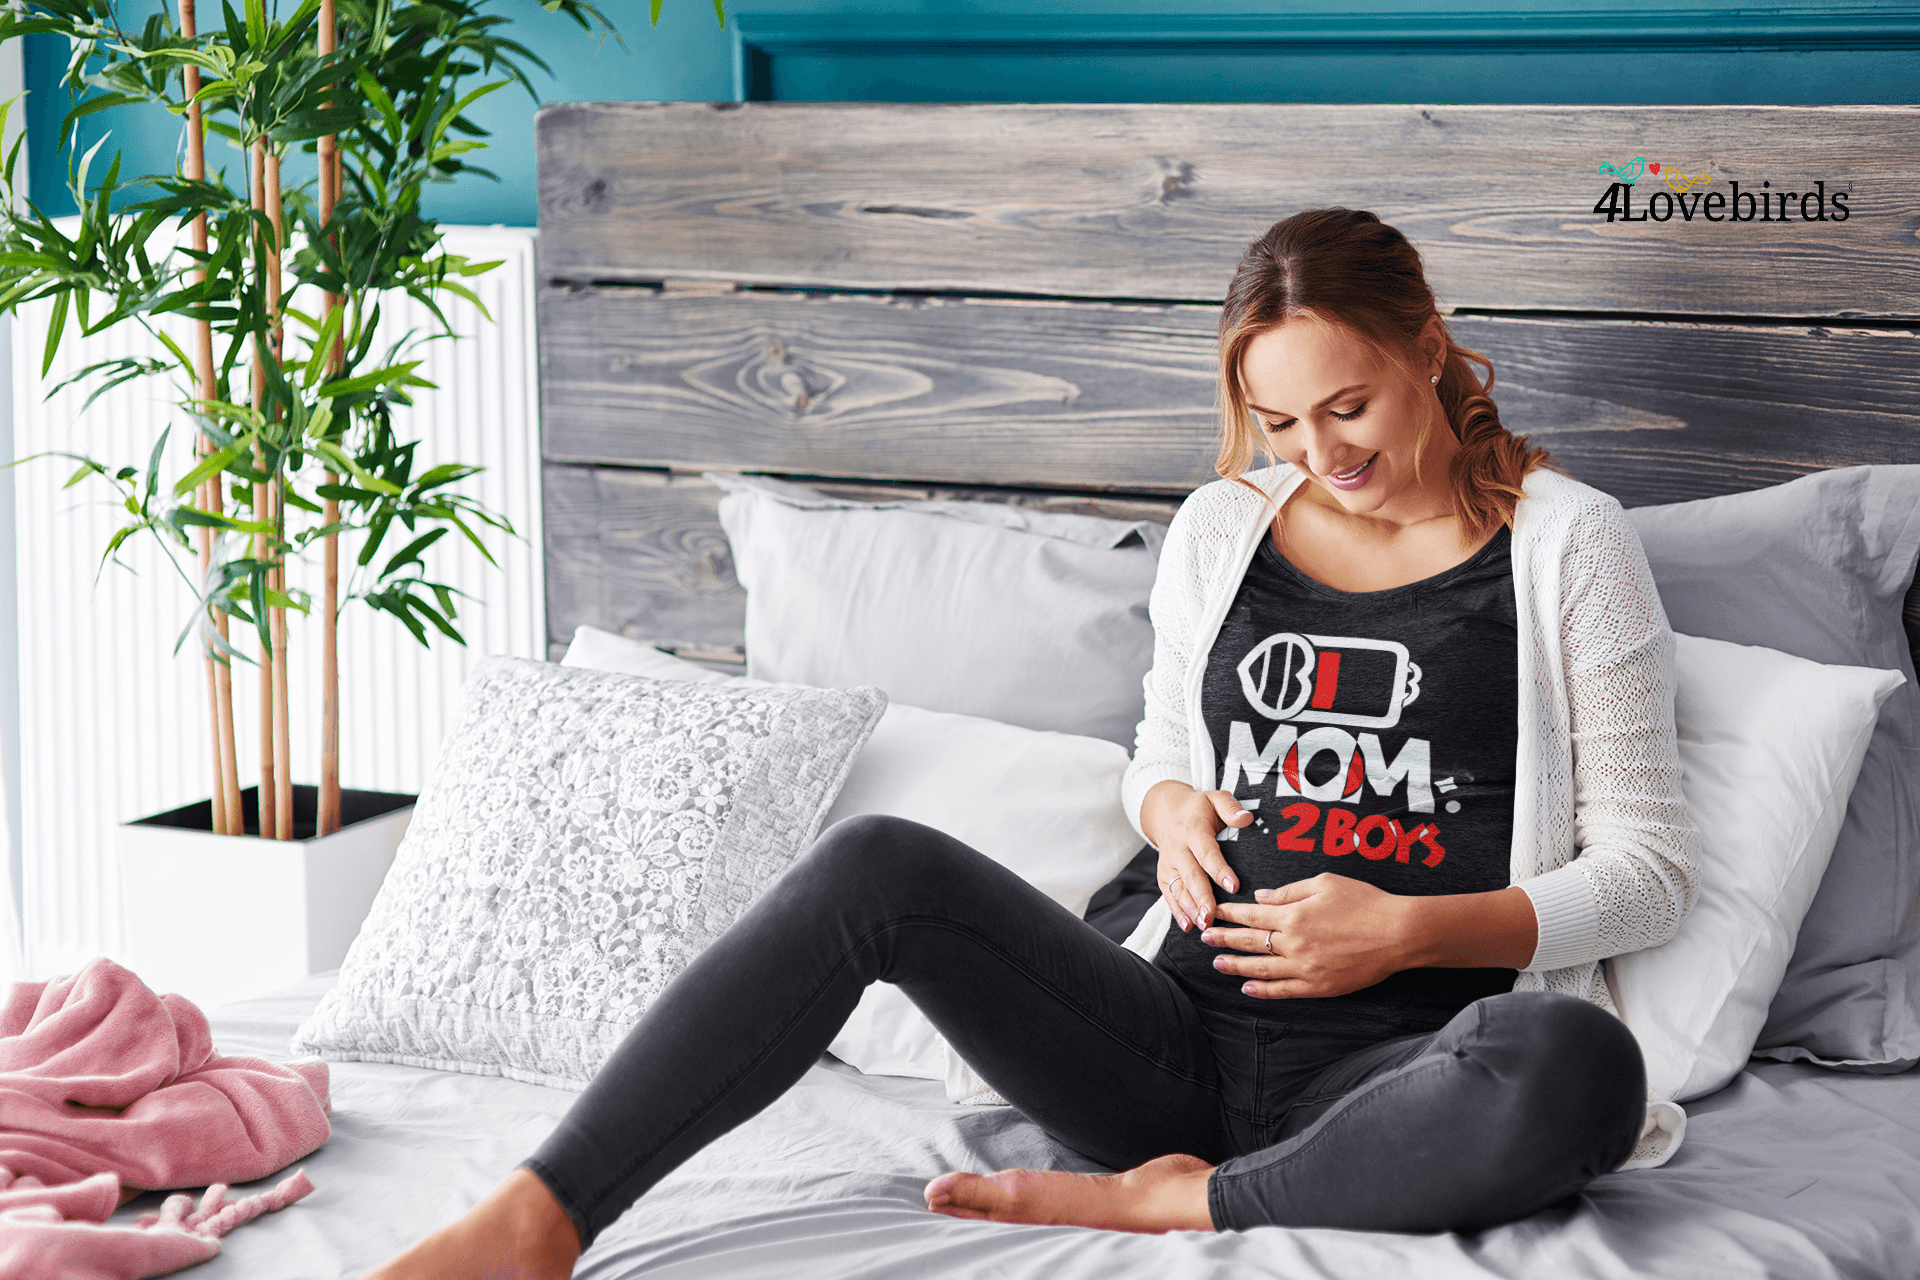 Mom of 2 Boys Funny Mothers Day Shirt, Mom of 2 Boys Shirt Gift from Son, Womens Clothing for Mom Wife, Mom Gift Idea for Wife from Husband - 4Lovebirds